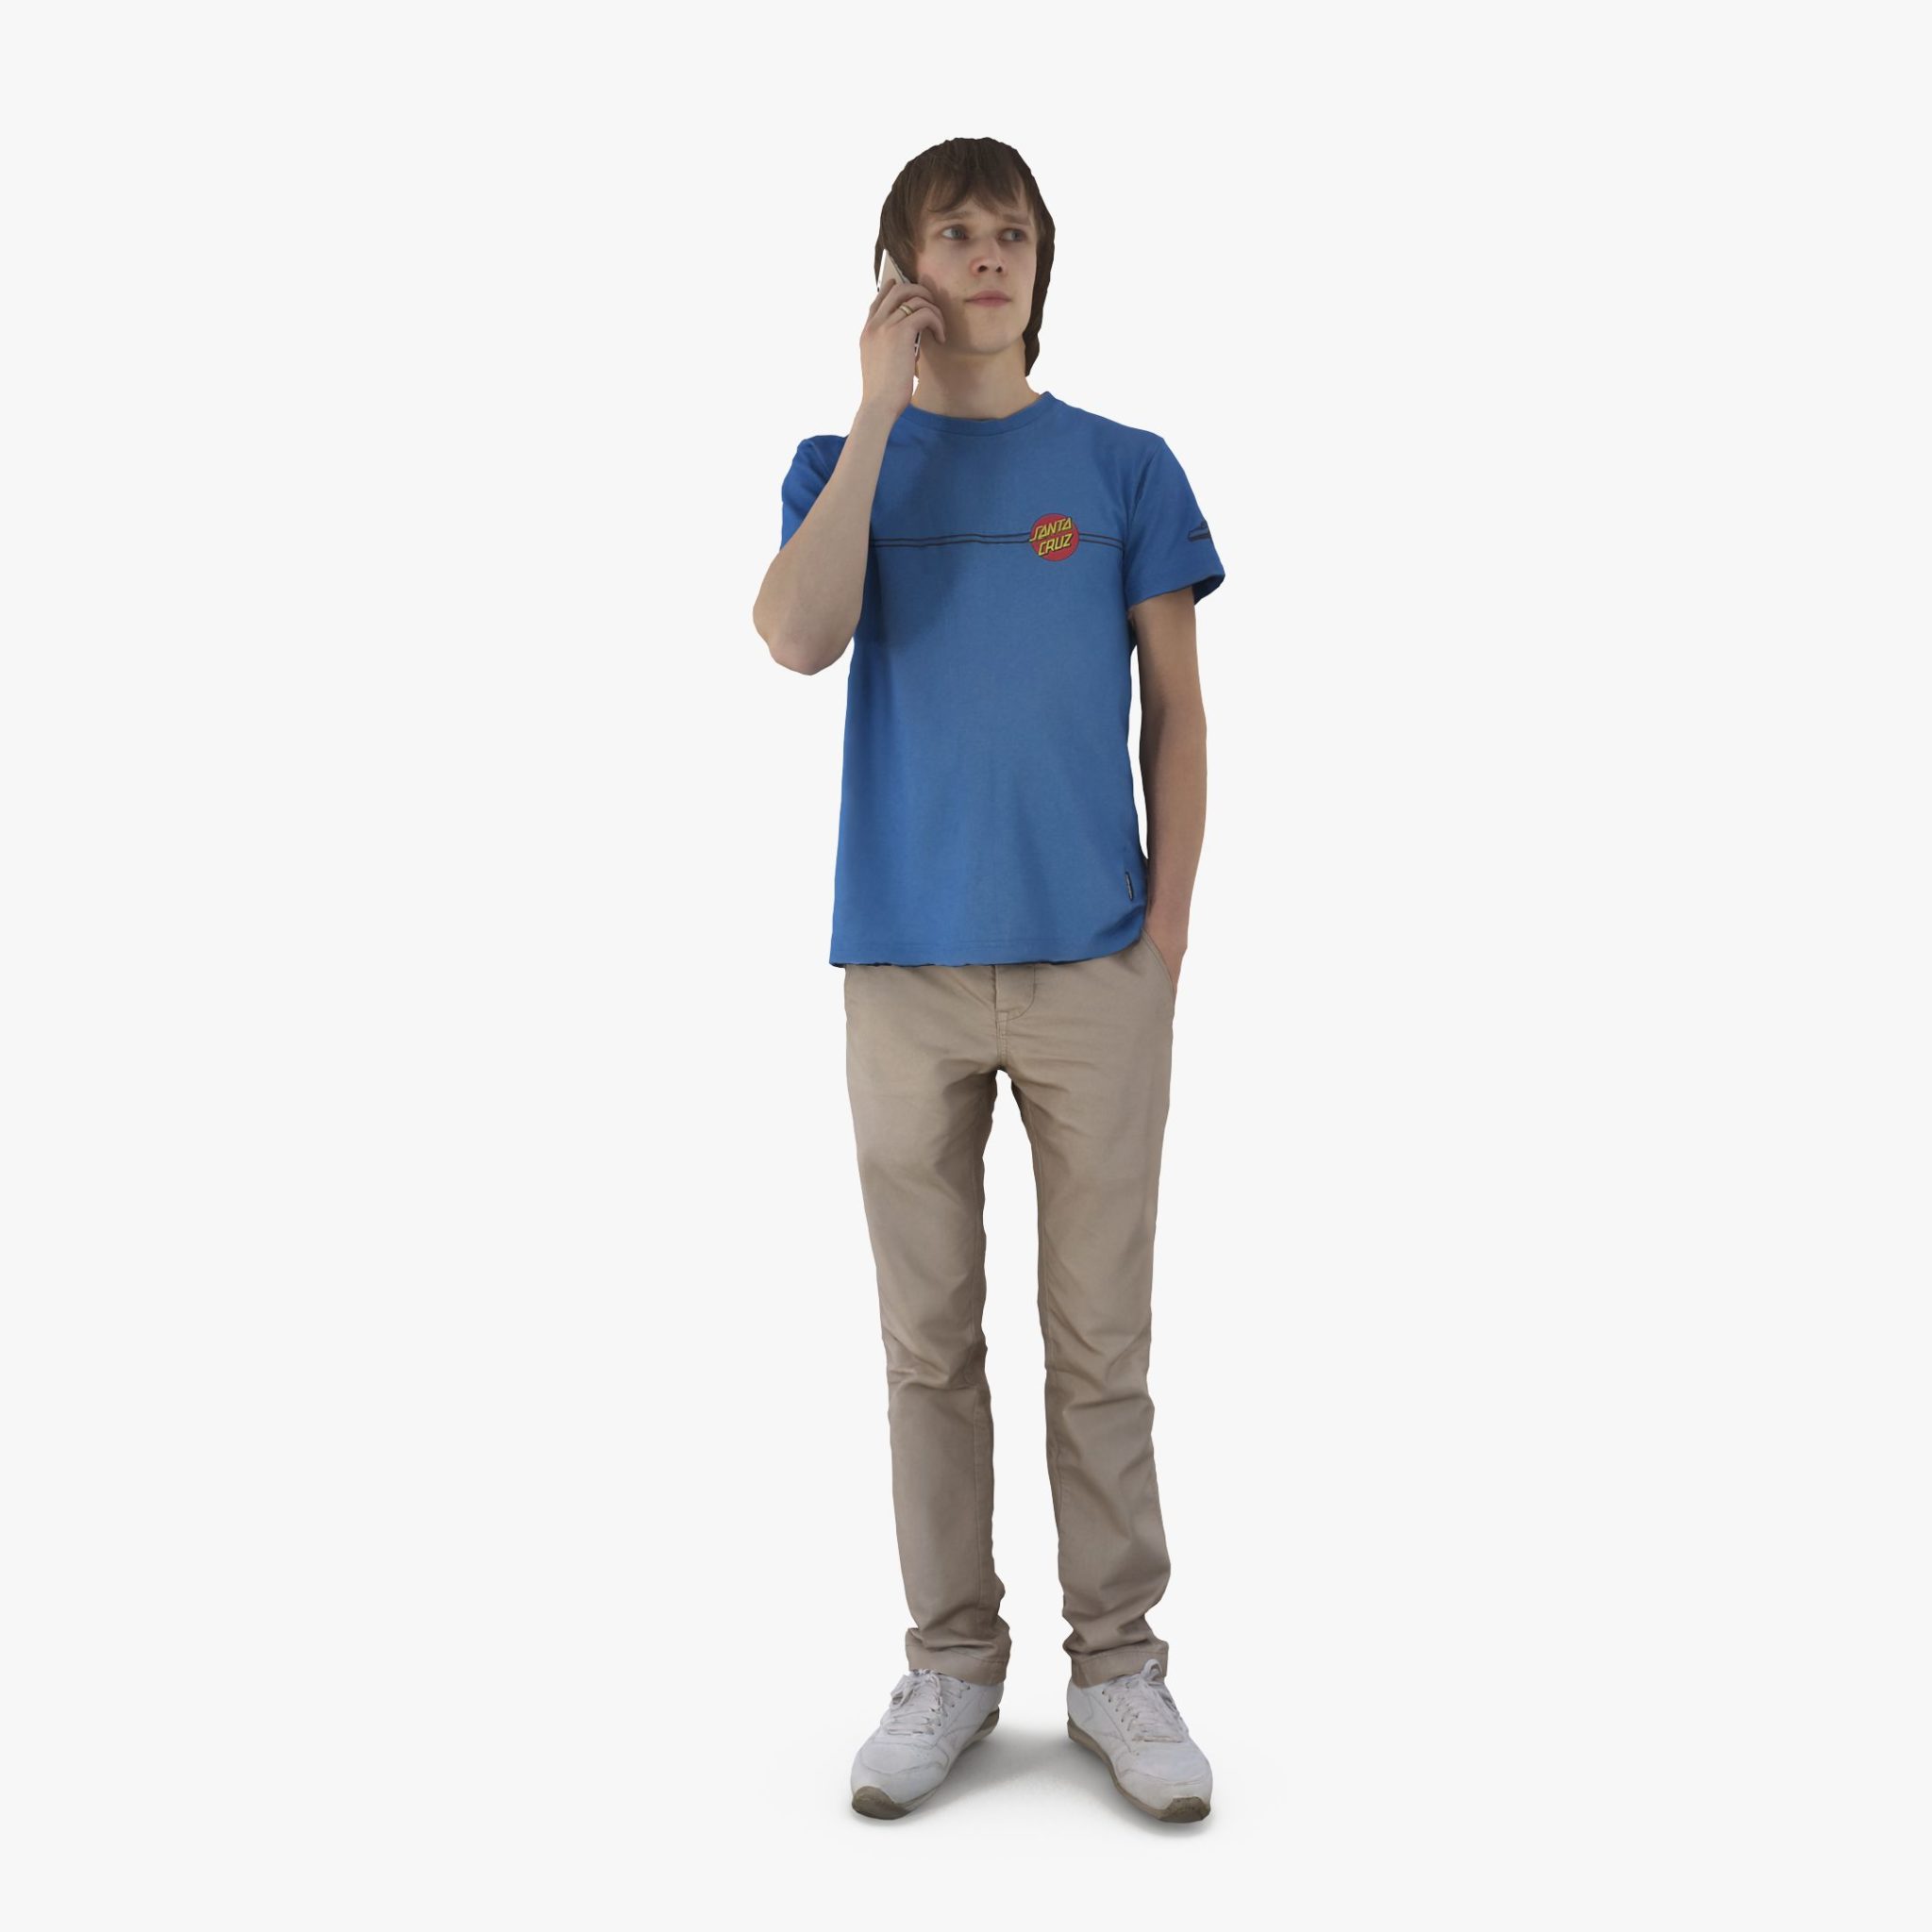 Boy with Phone 3D Model | 3DTree Scanning Studio